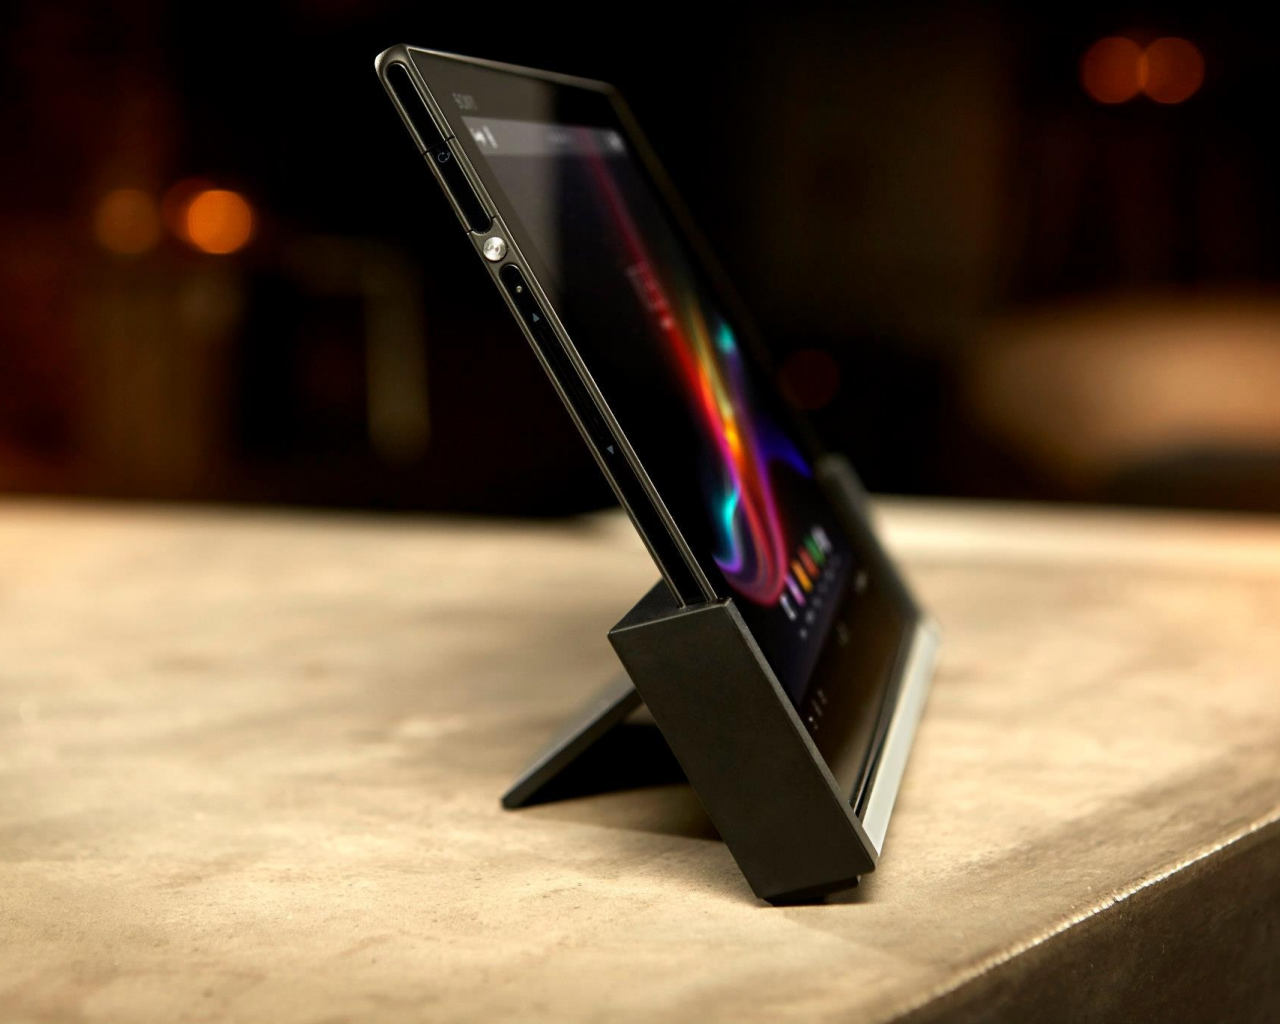 xperia tablet z, android, sony, планшет